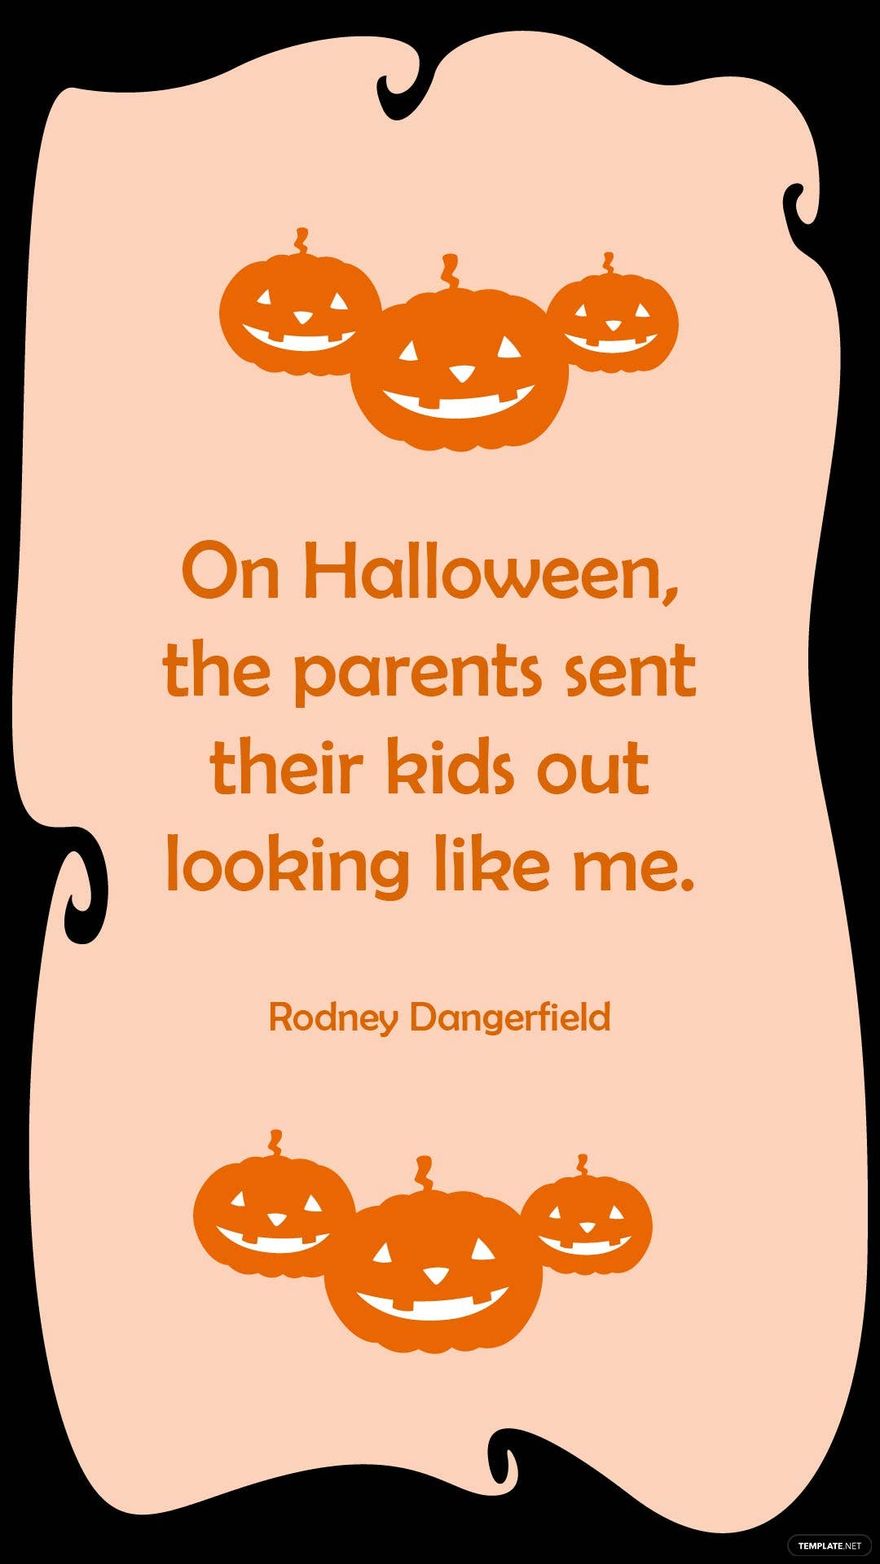 Free Rodney Dangerfield-On Halloween, the parents sent their kids out looking like me. in JPG